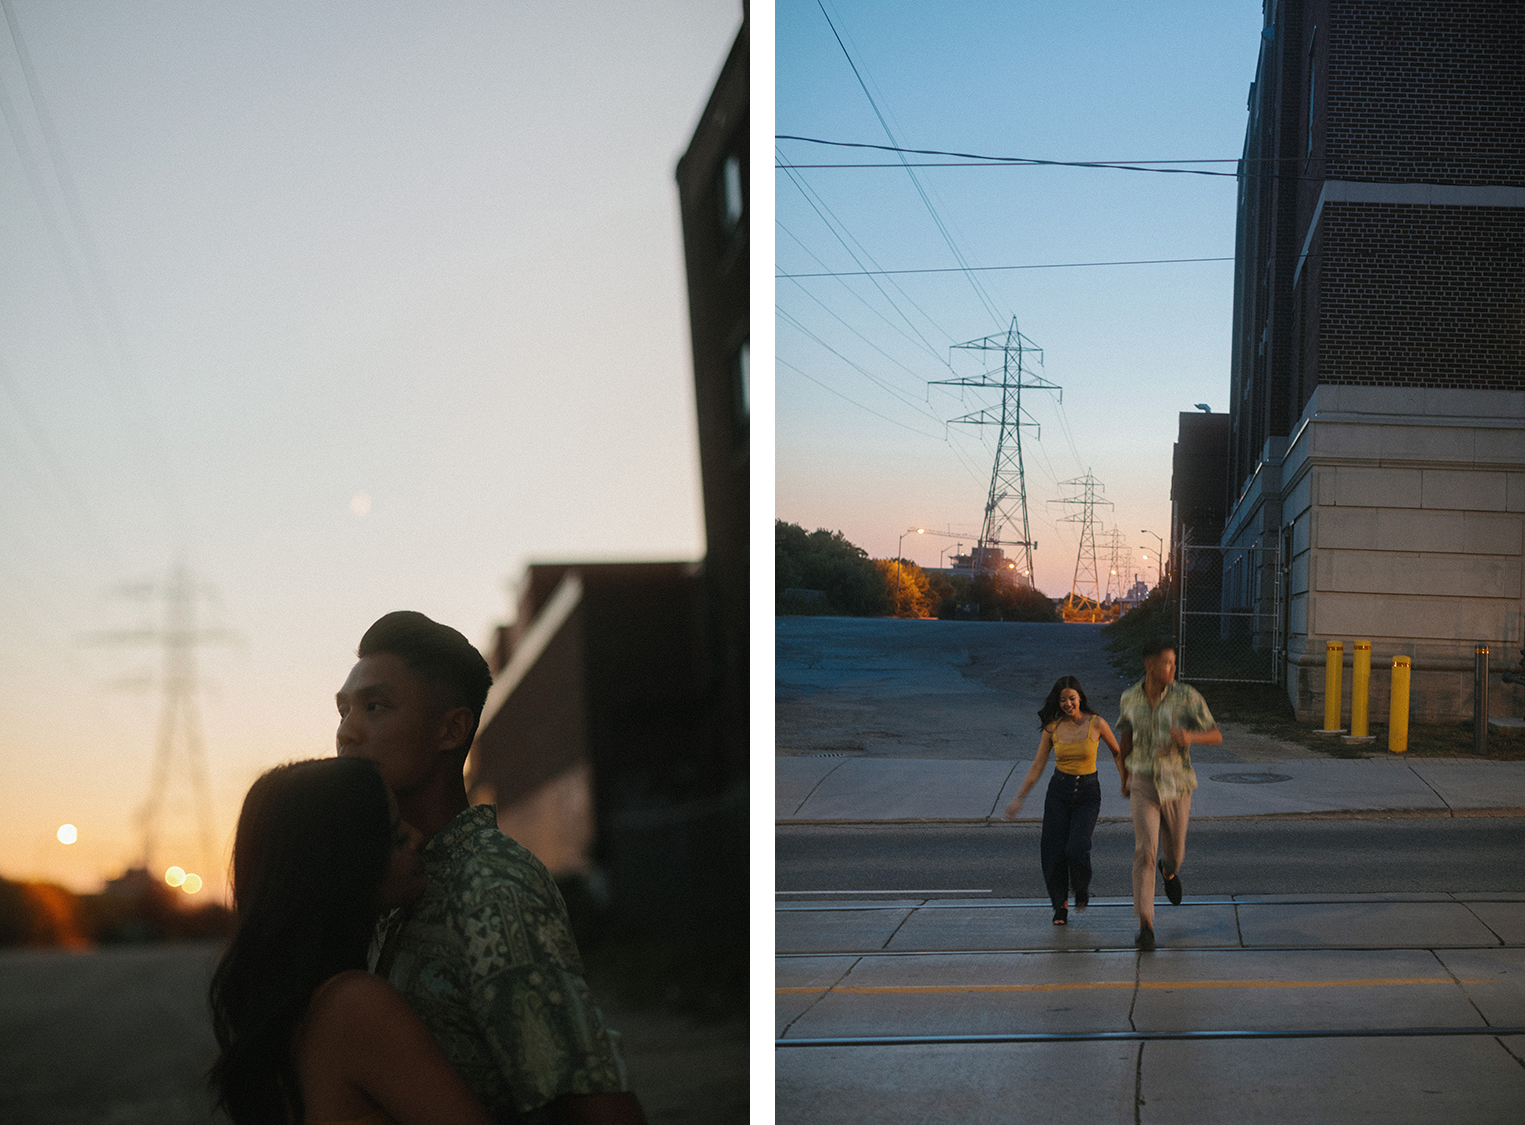 places-to-take-engagement-pictures-permit-free-photography-locations-toronto-dupont-annex-bloor-west-49.PNG